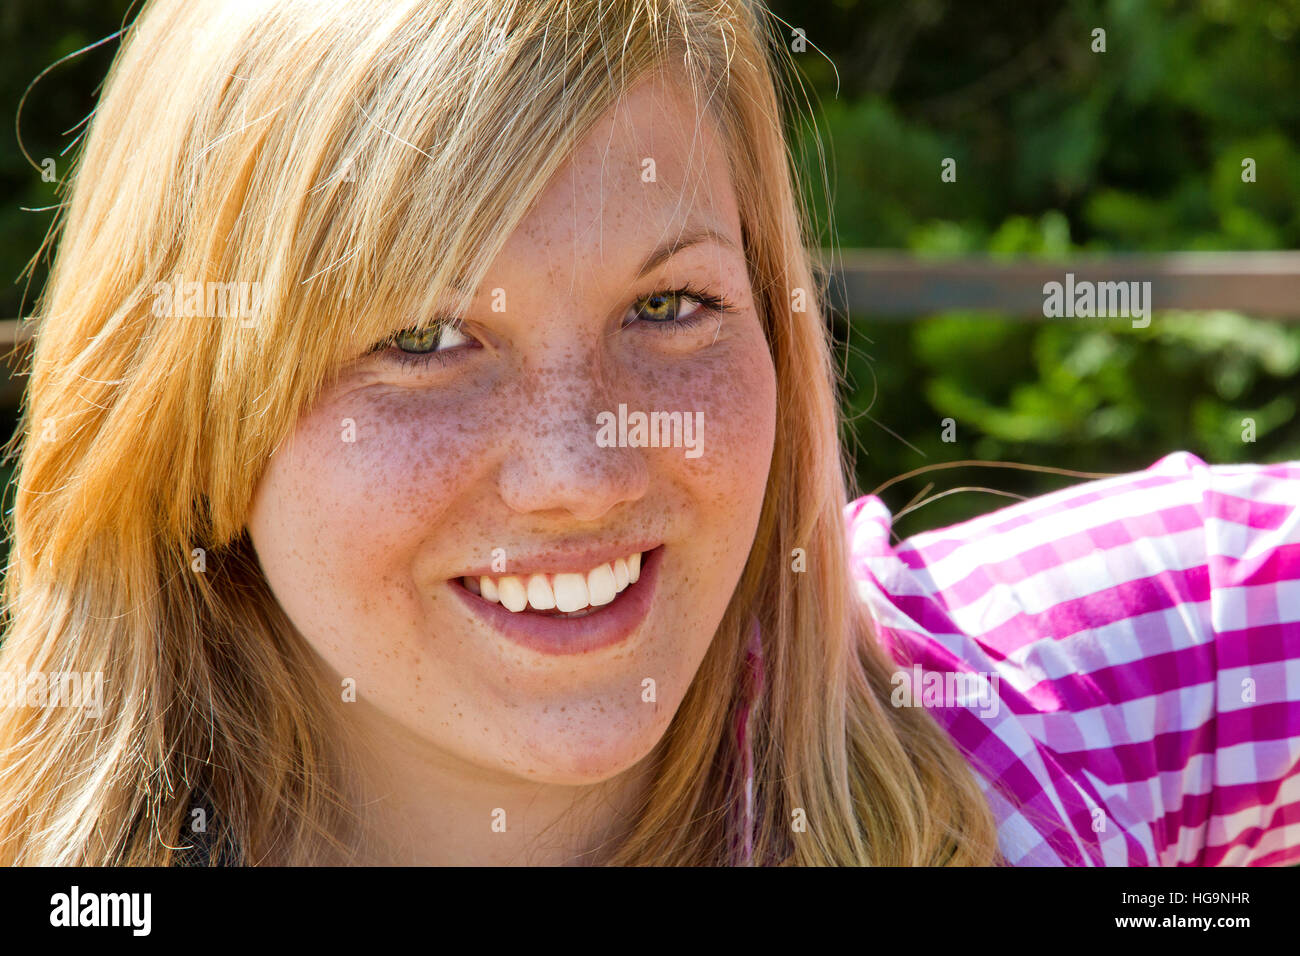 Portrait of a smiling young girl Stock Photo